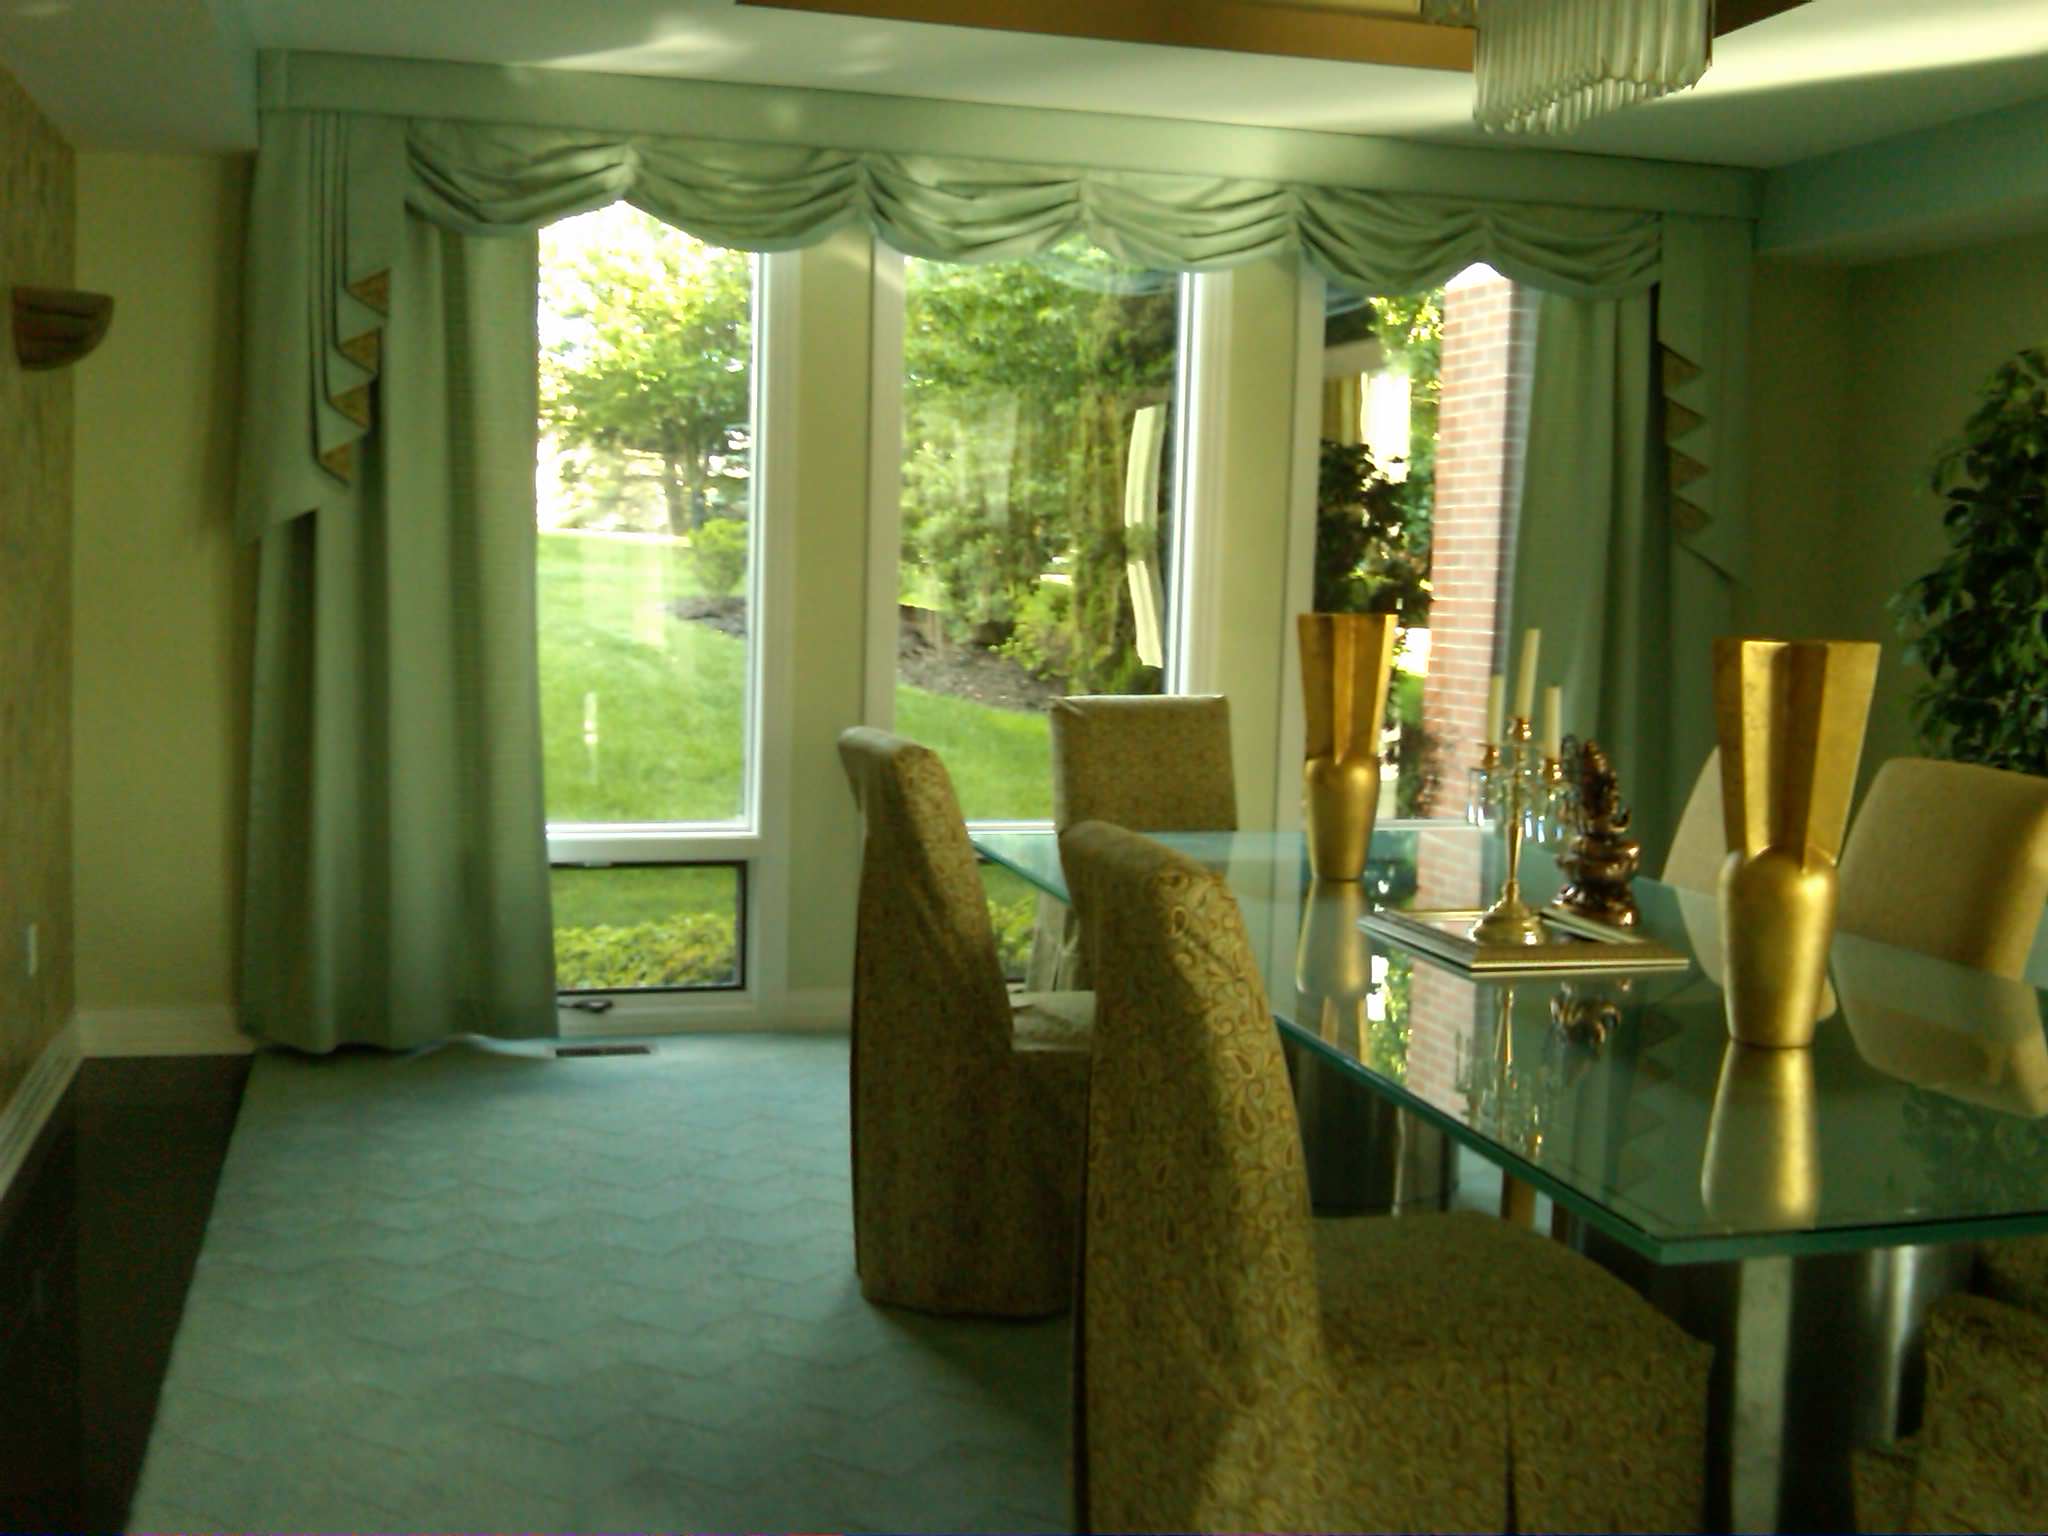 Custom Window Treatments and Parson Chair Covers